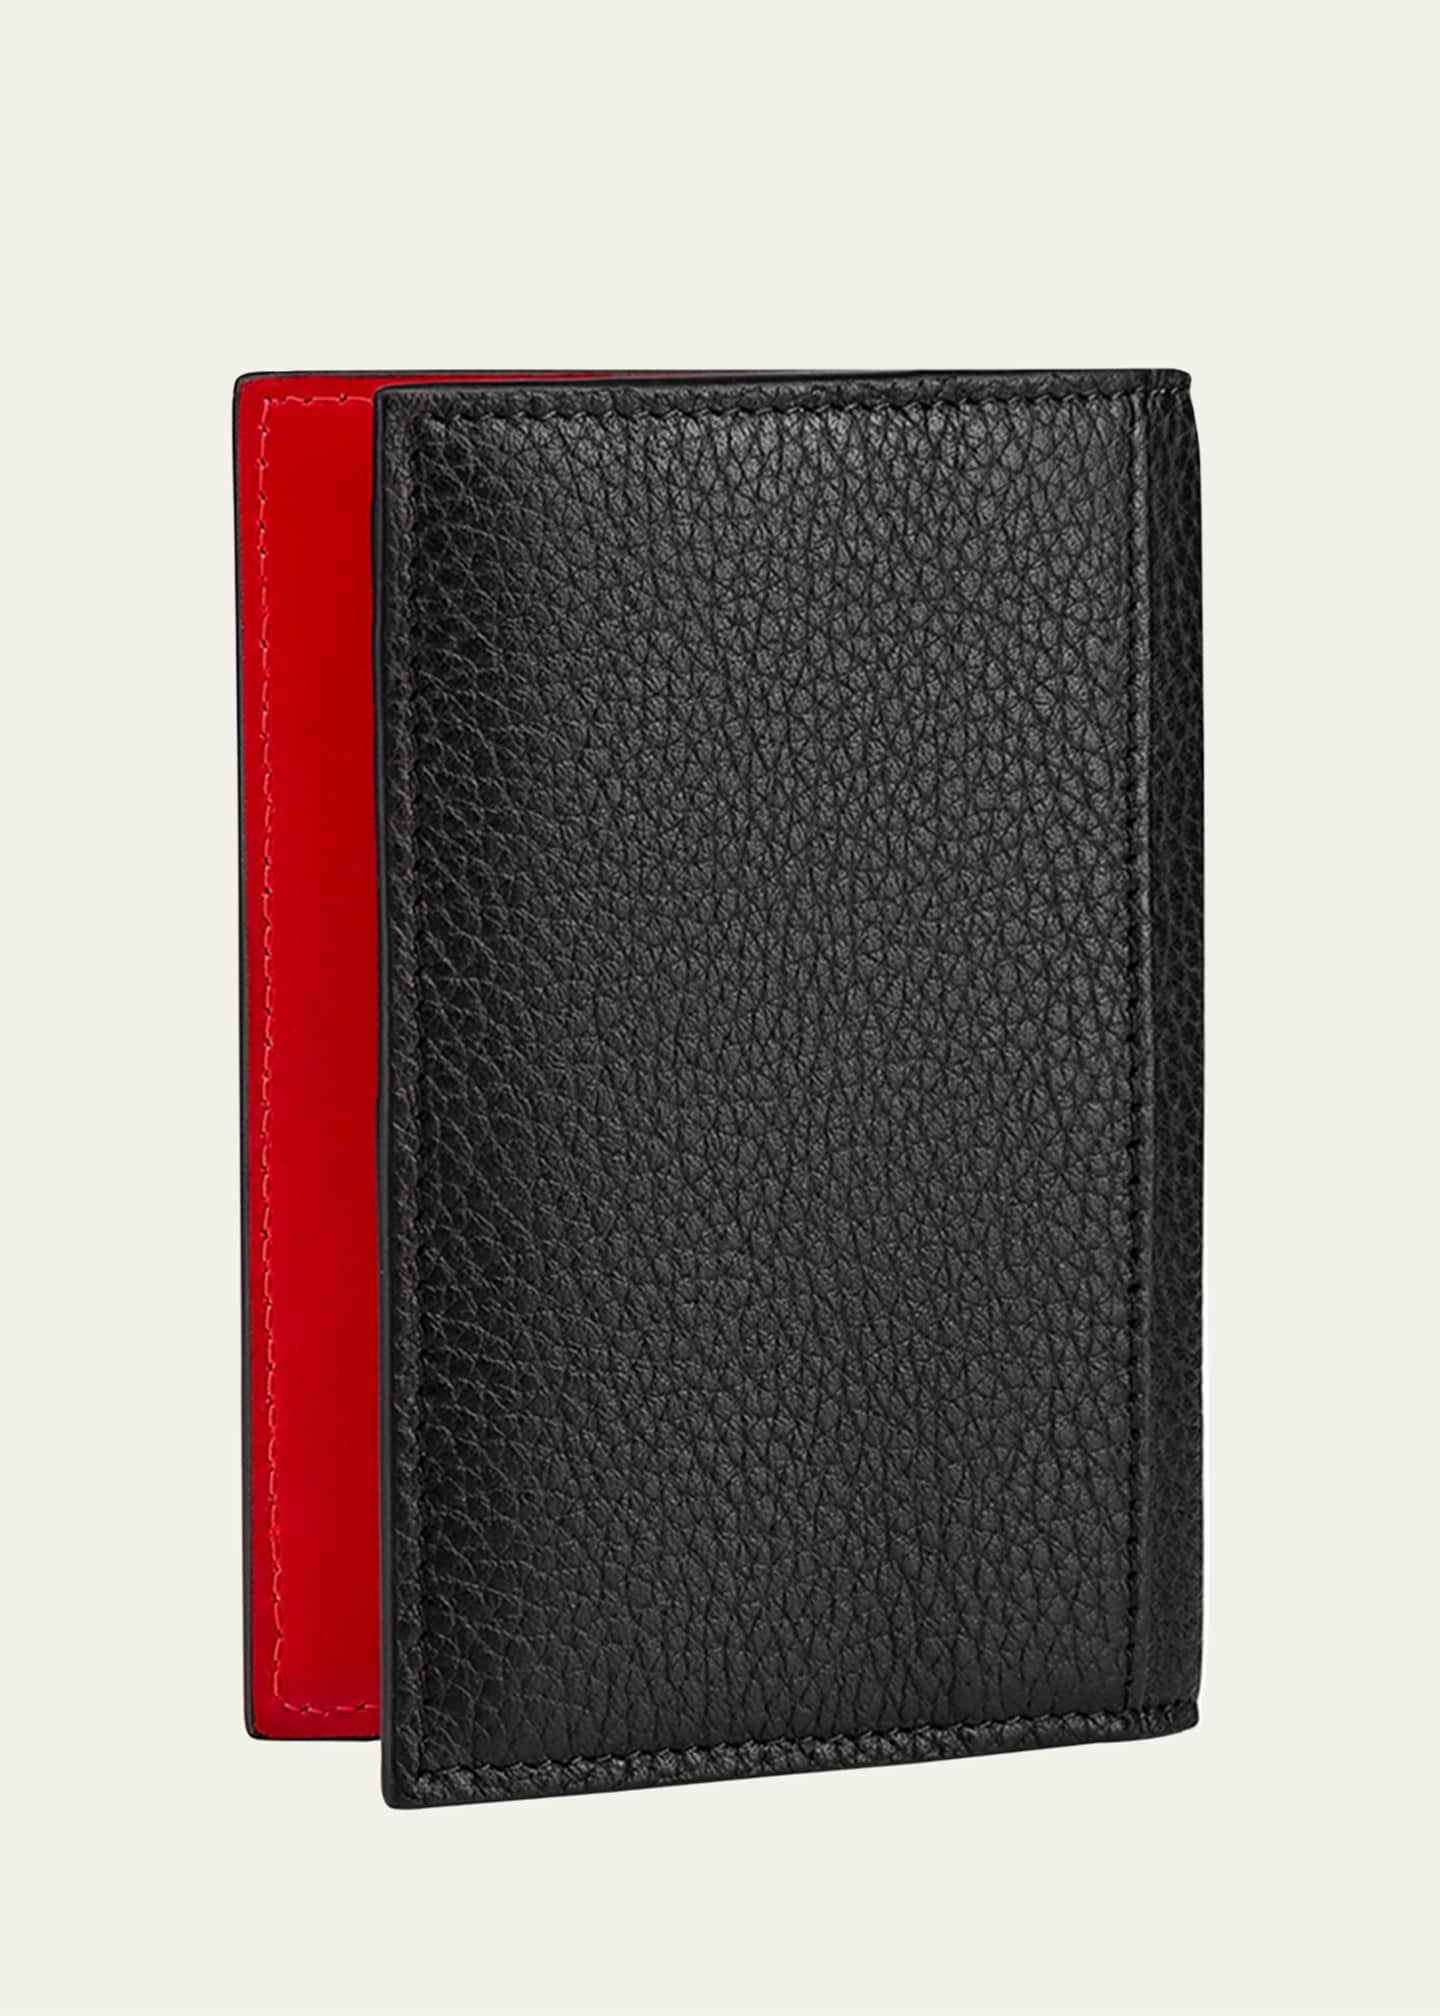 Christian Louboutin Men's Empire Two-Tone Leather Wallet Image 3 of 5